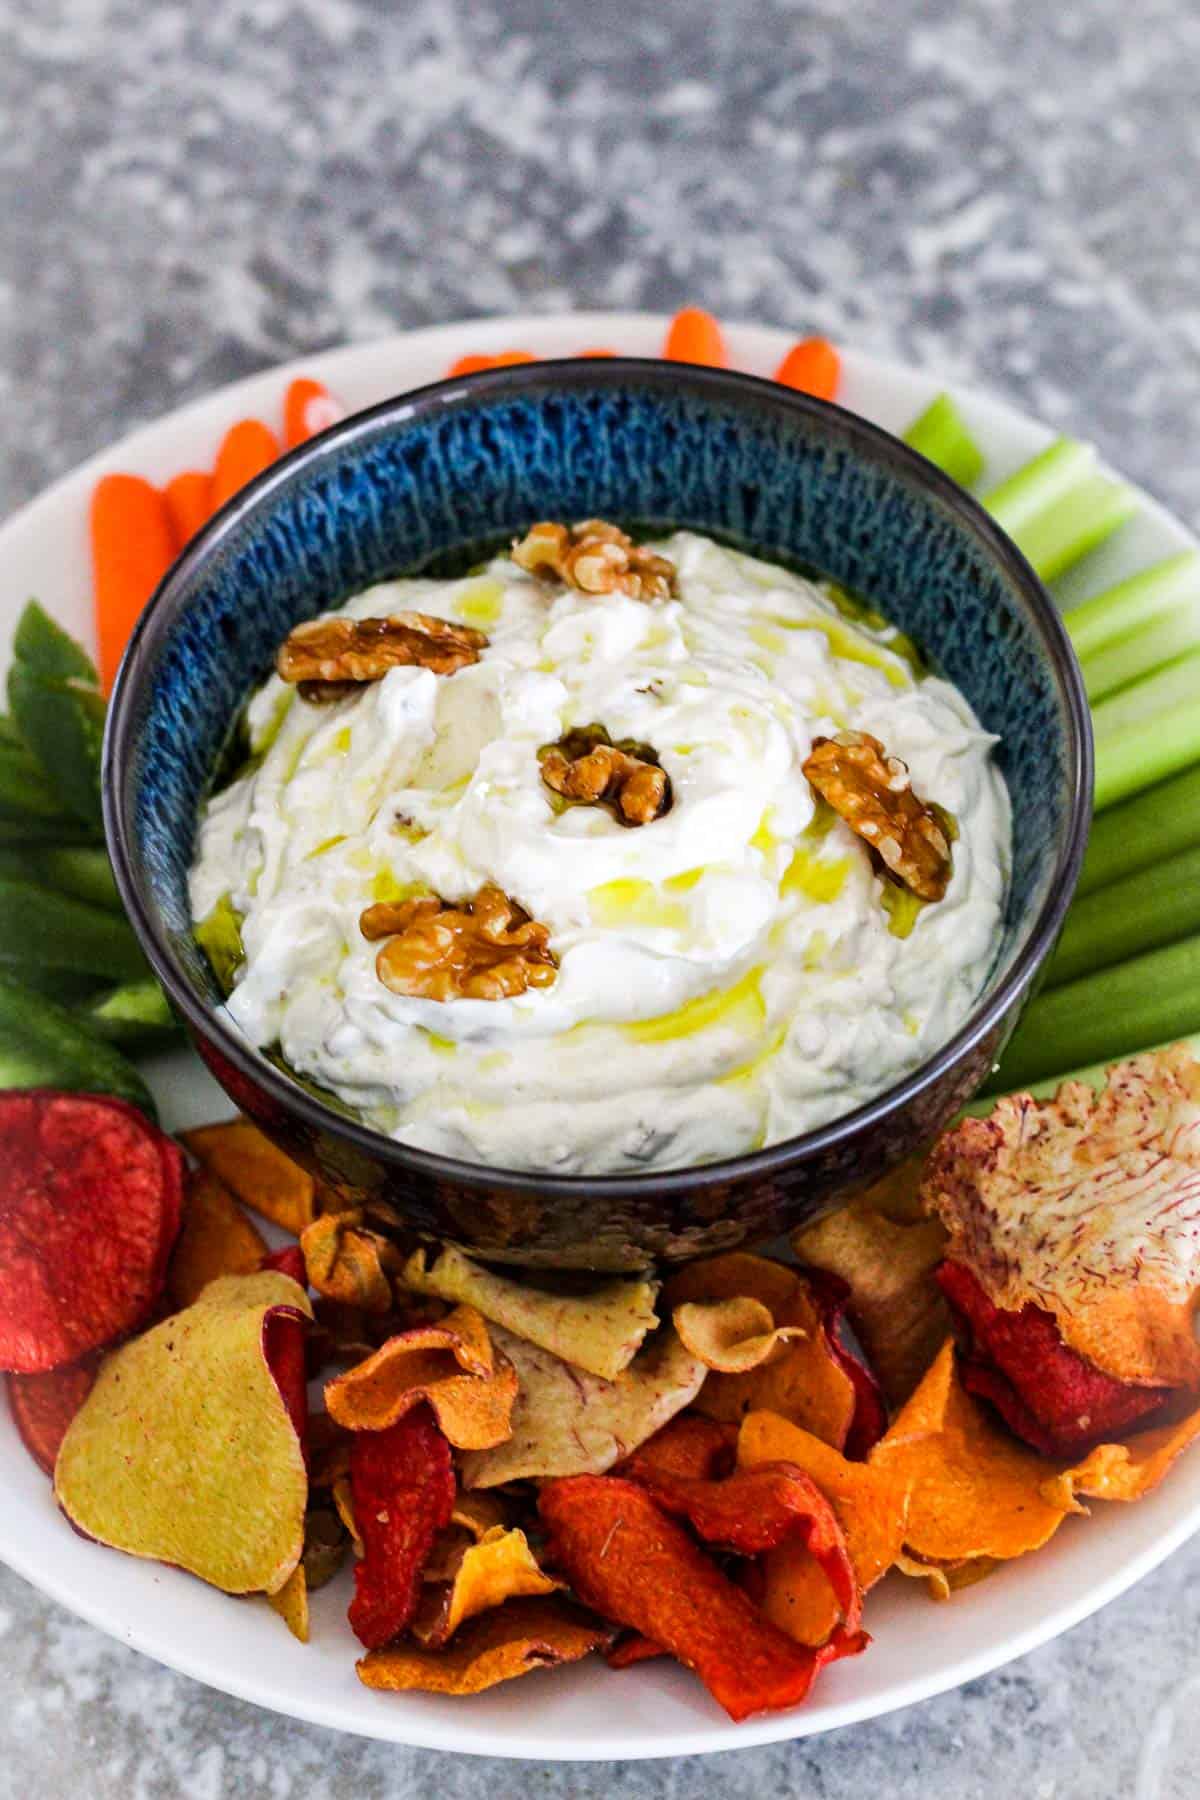 A bowl of sour cream dip with walnuts and garlic, garnished with walnuts and olive oil. Dip is served with colorful chips and vegetables.